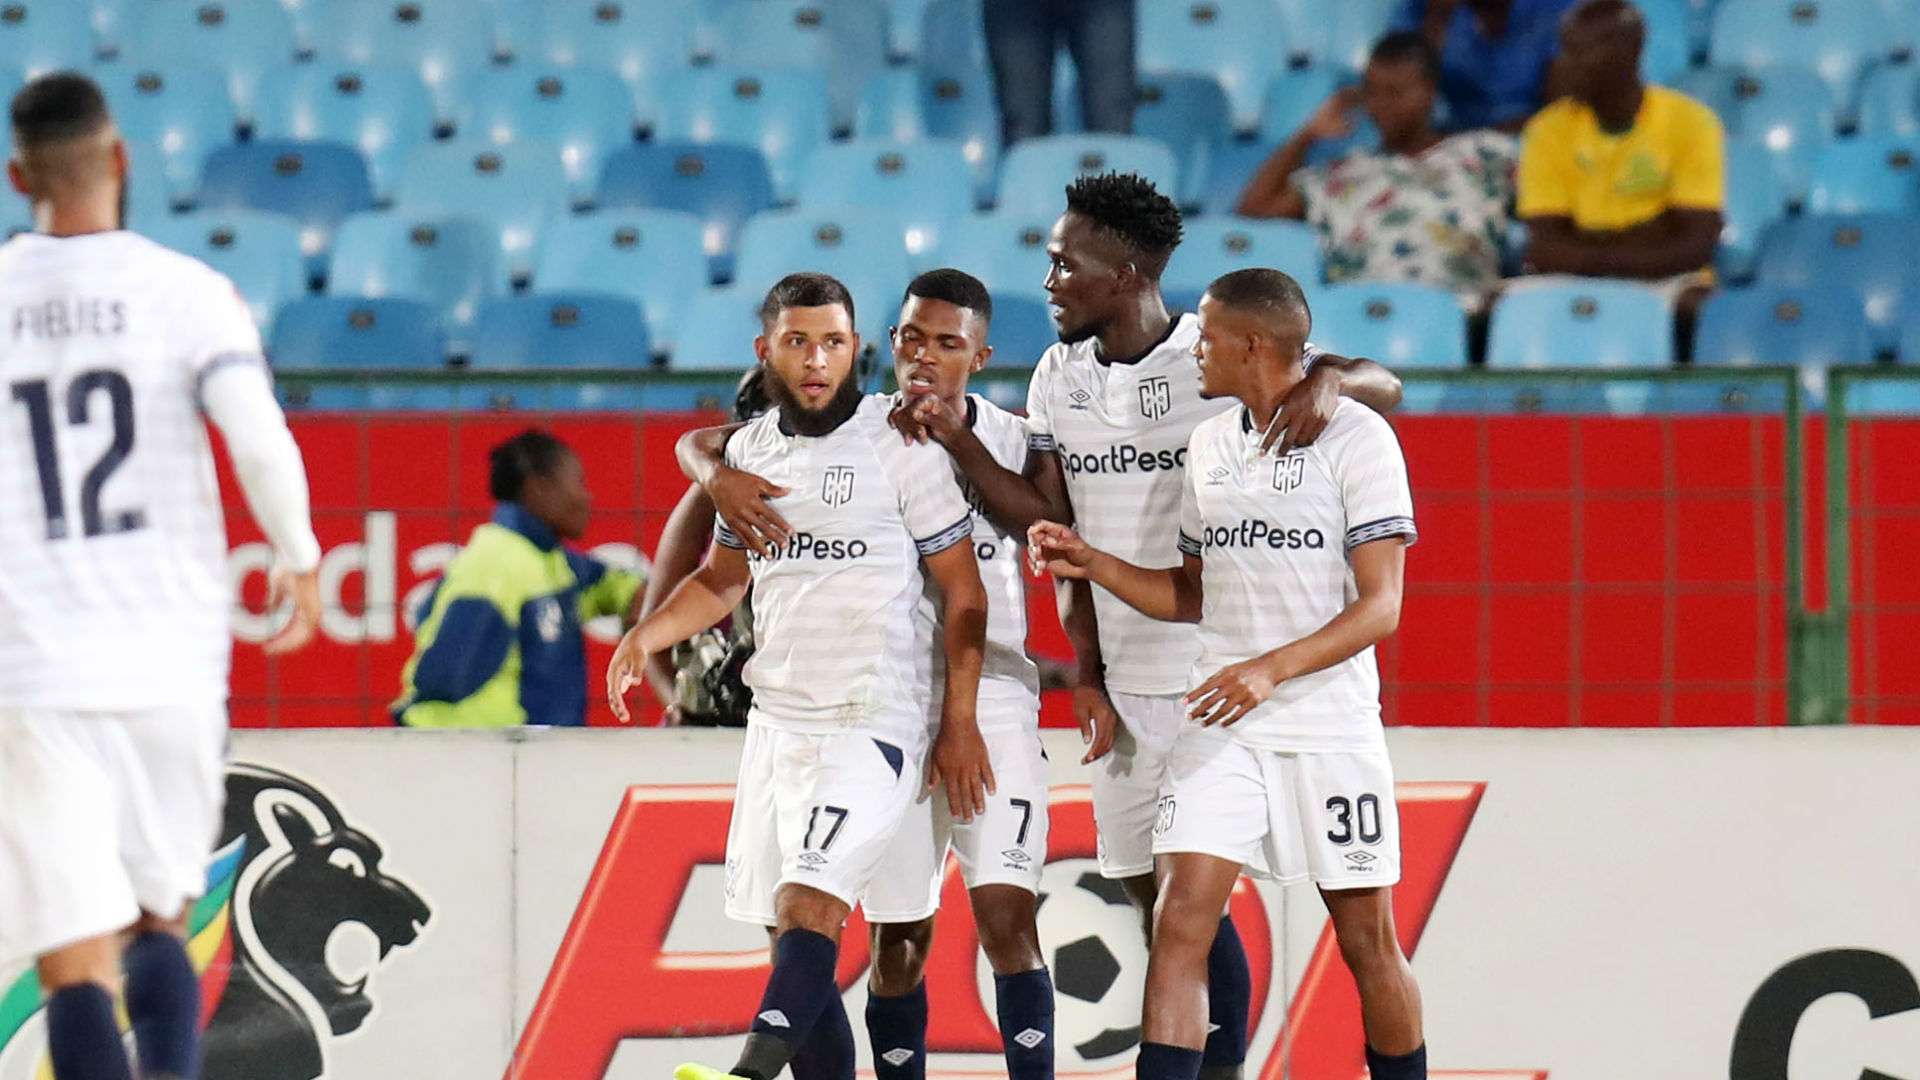 Riyaad Norodien with his Cape Town City team-mates, February 2019